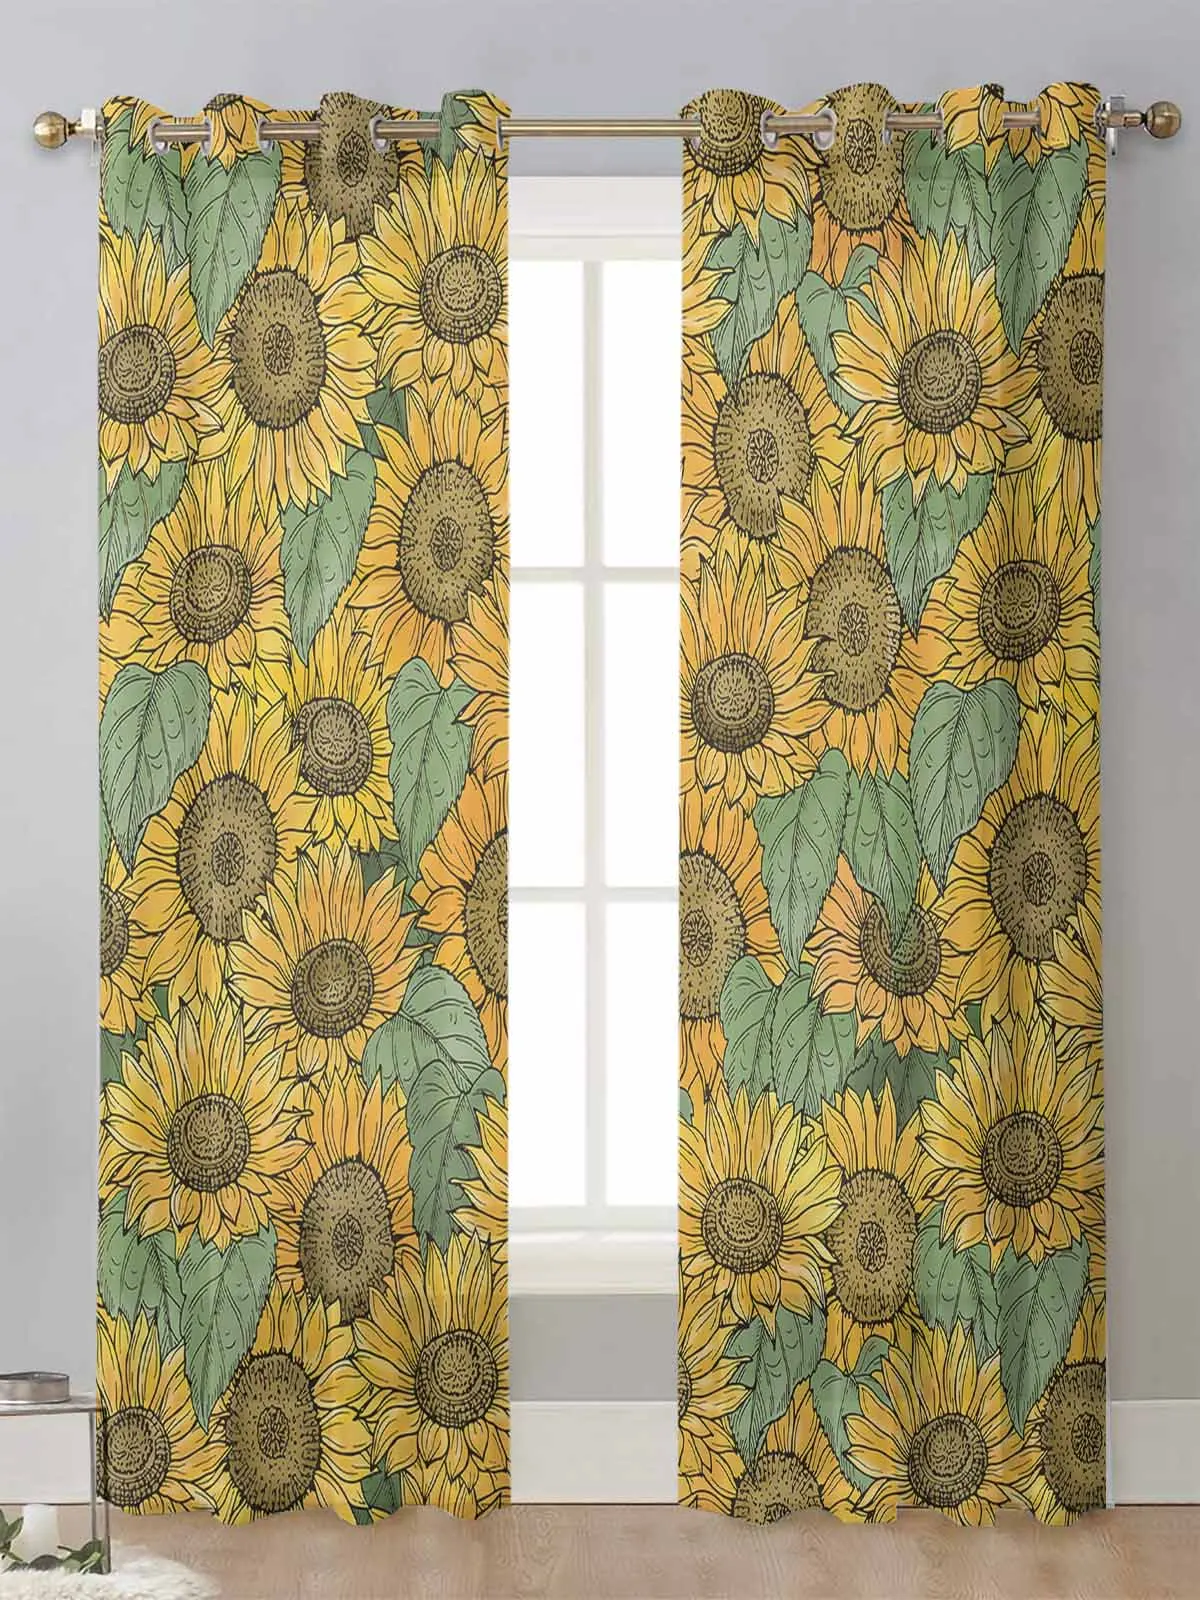 

Plant Flower Sunflower Sheer Curtains For Living Room Window Transparent Voile Tulle Curtain Cortinas Drapes Home Decor